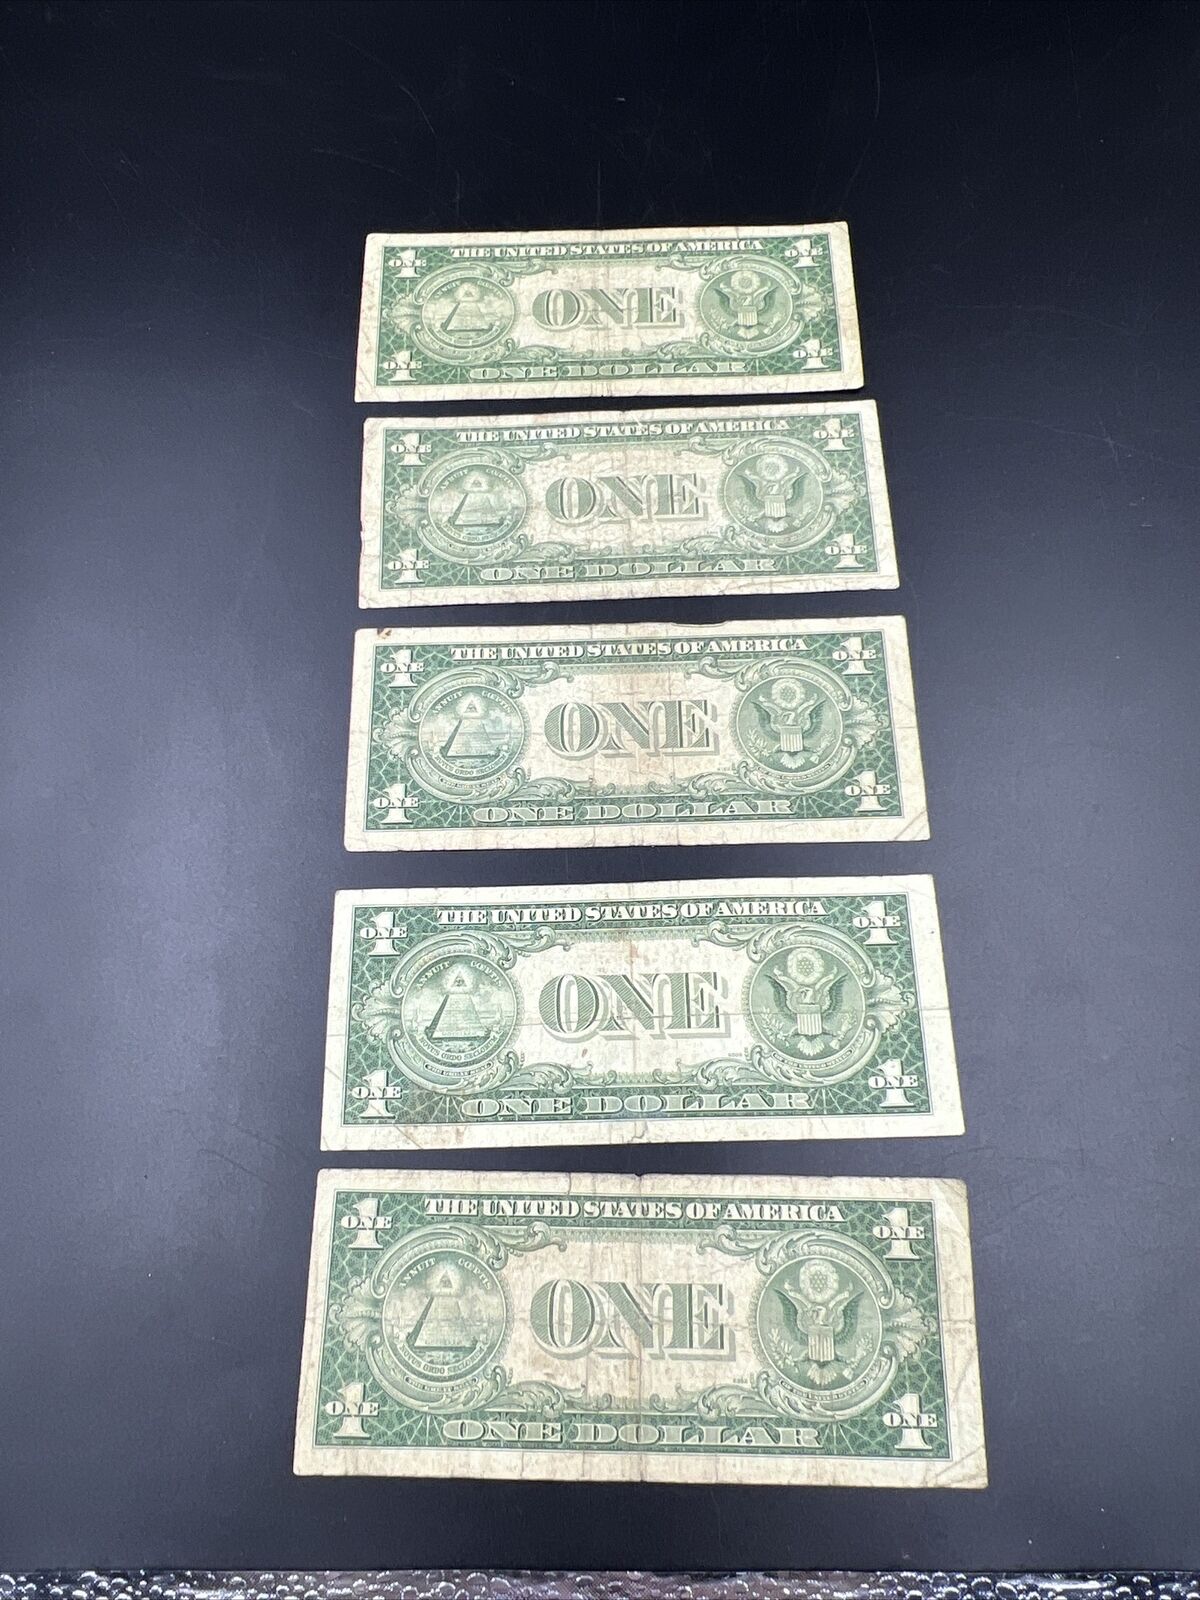 Lot of 5 1935 $1 Silver Certificate Blue Seal Notes VG Circ Neat Serial #336